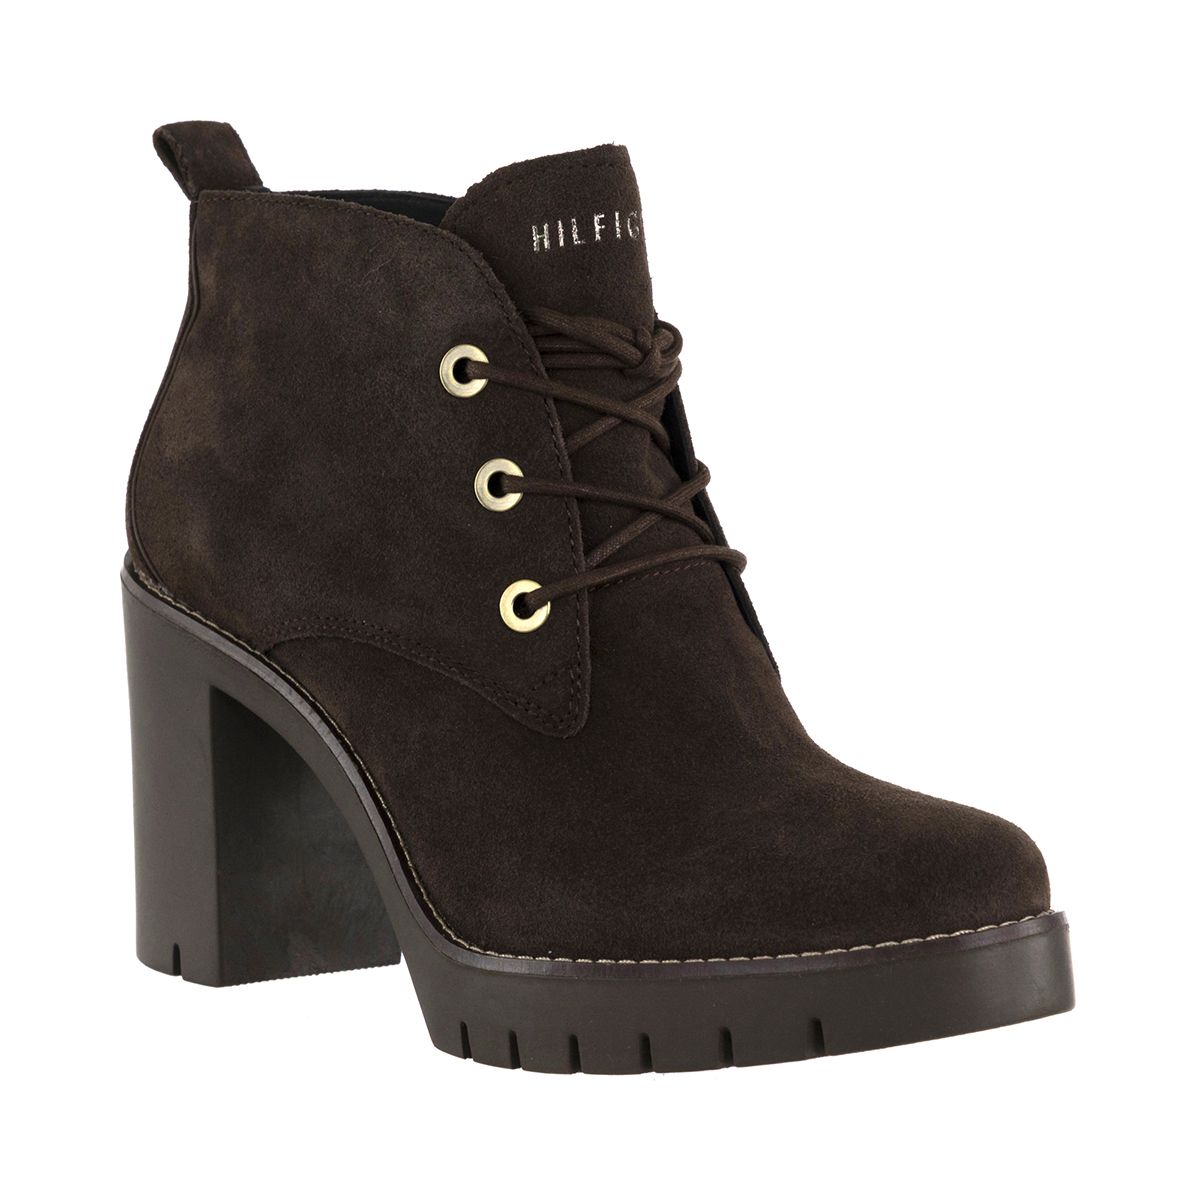 Tommy Hilfiger FW0FW01541-211-41 Ankle Boots